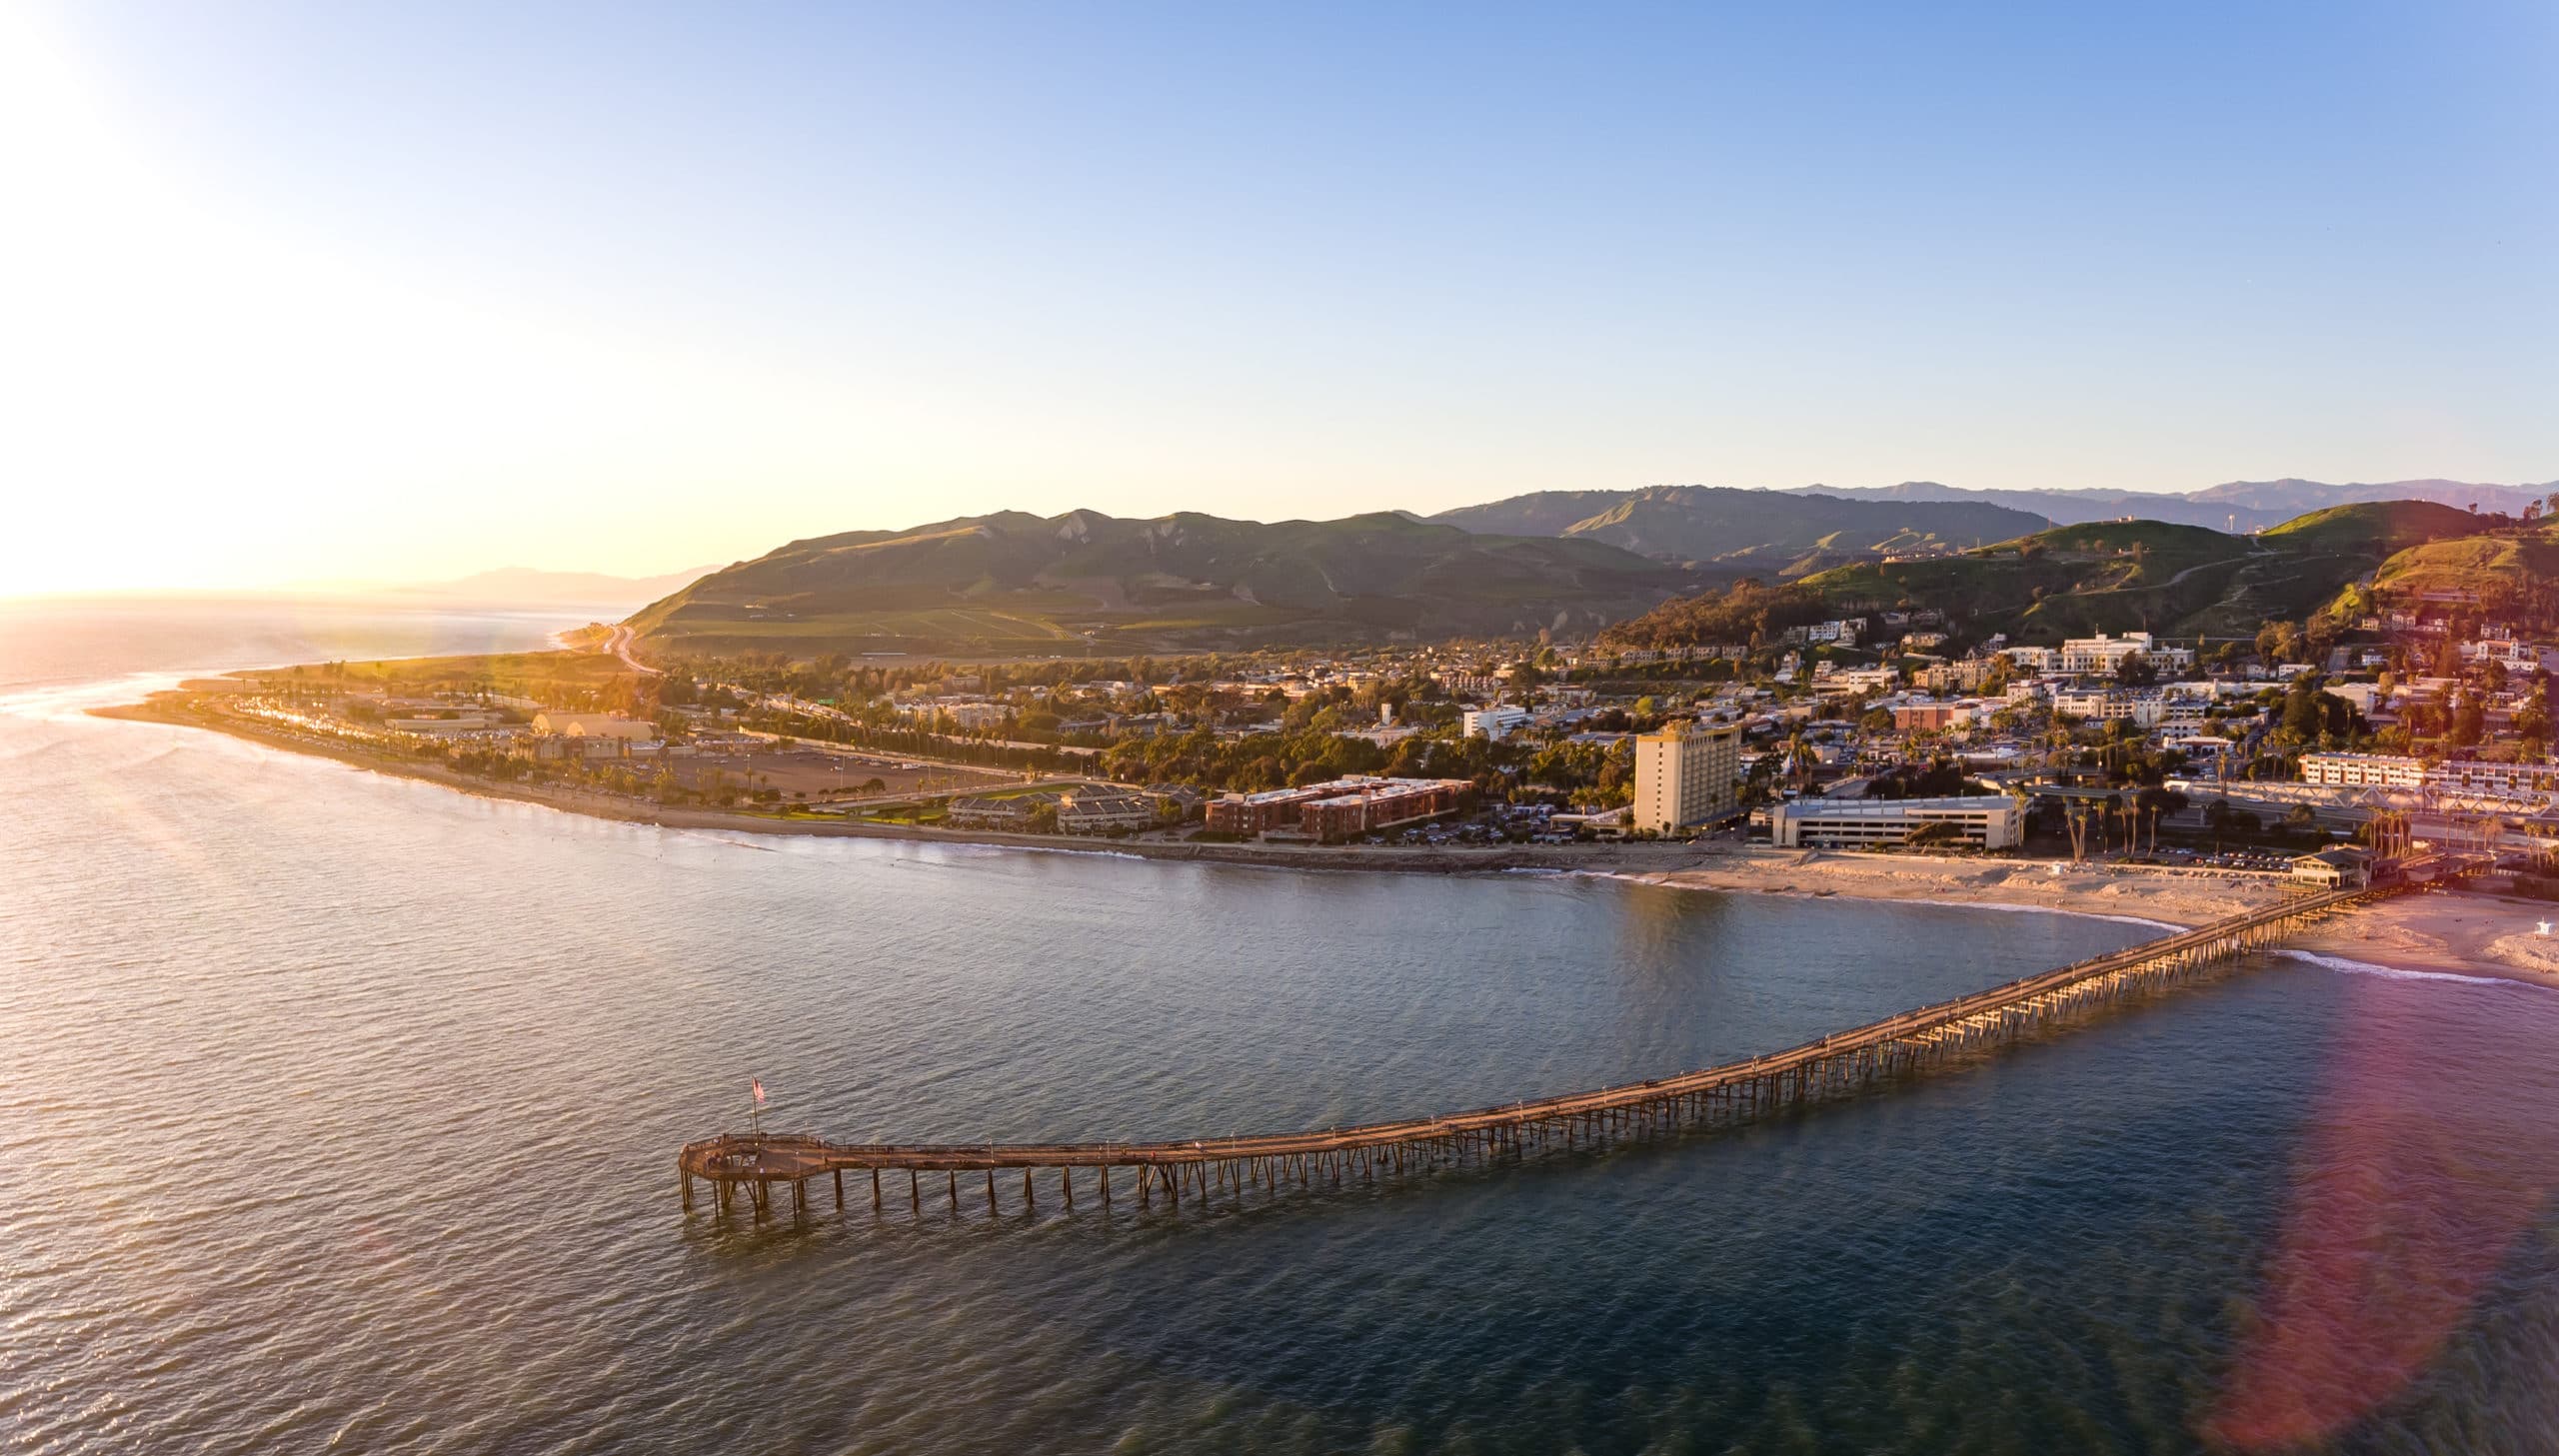 View of Downtown Ventura above the pier.